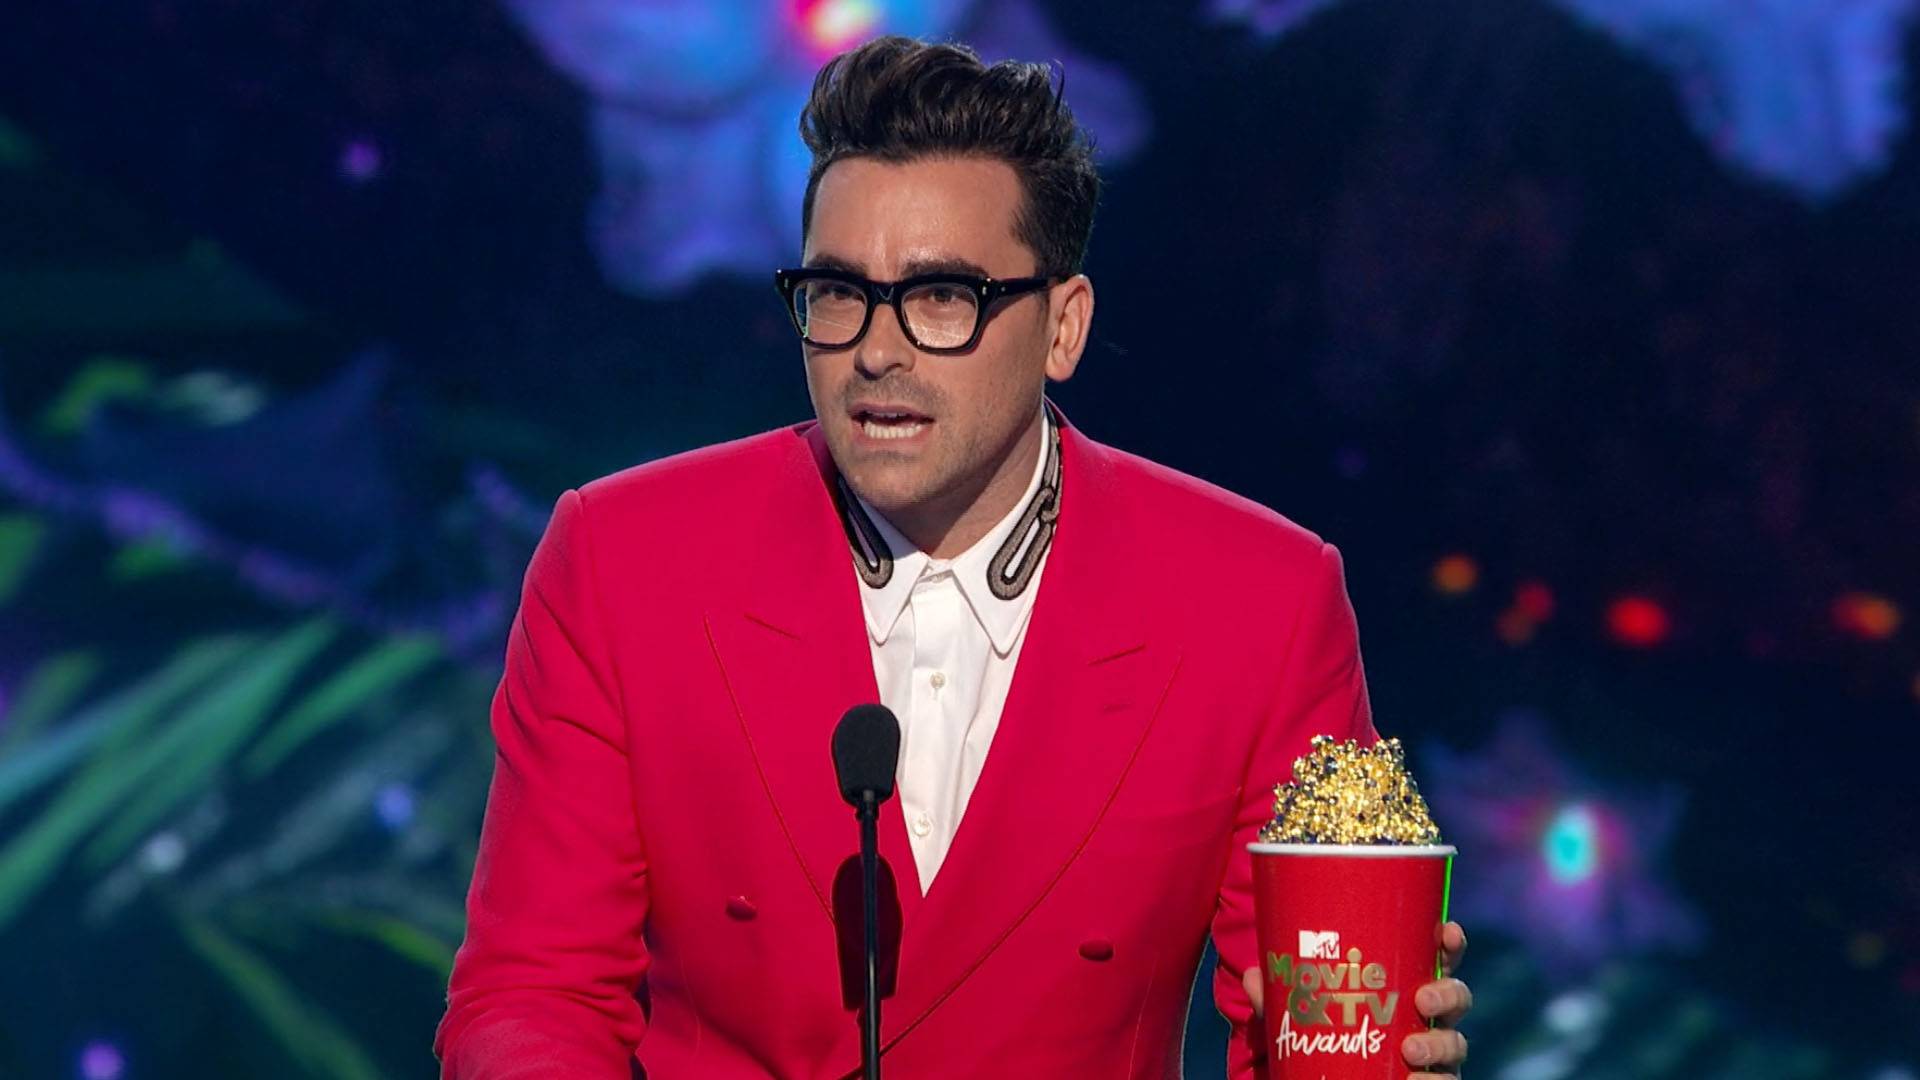 Dan Levy Accepts the Award Best Comedic Performance - (Video Clip) | MTV